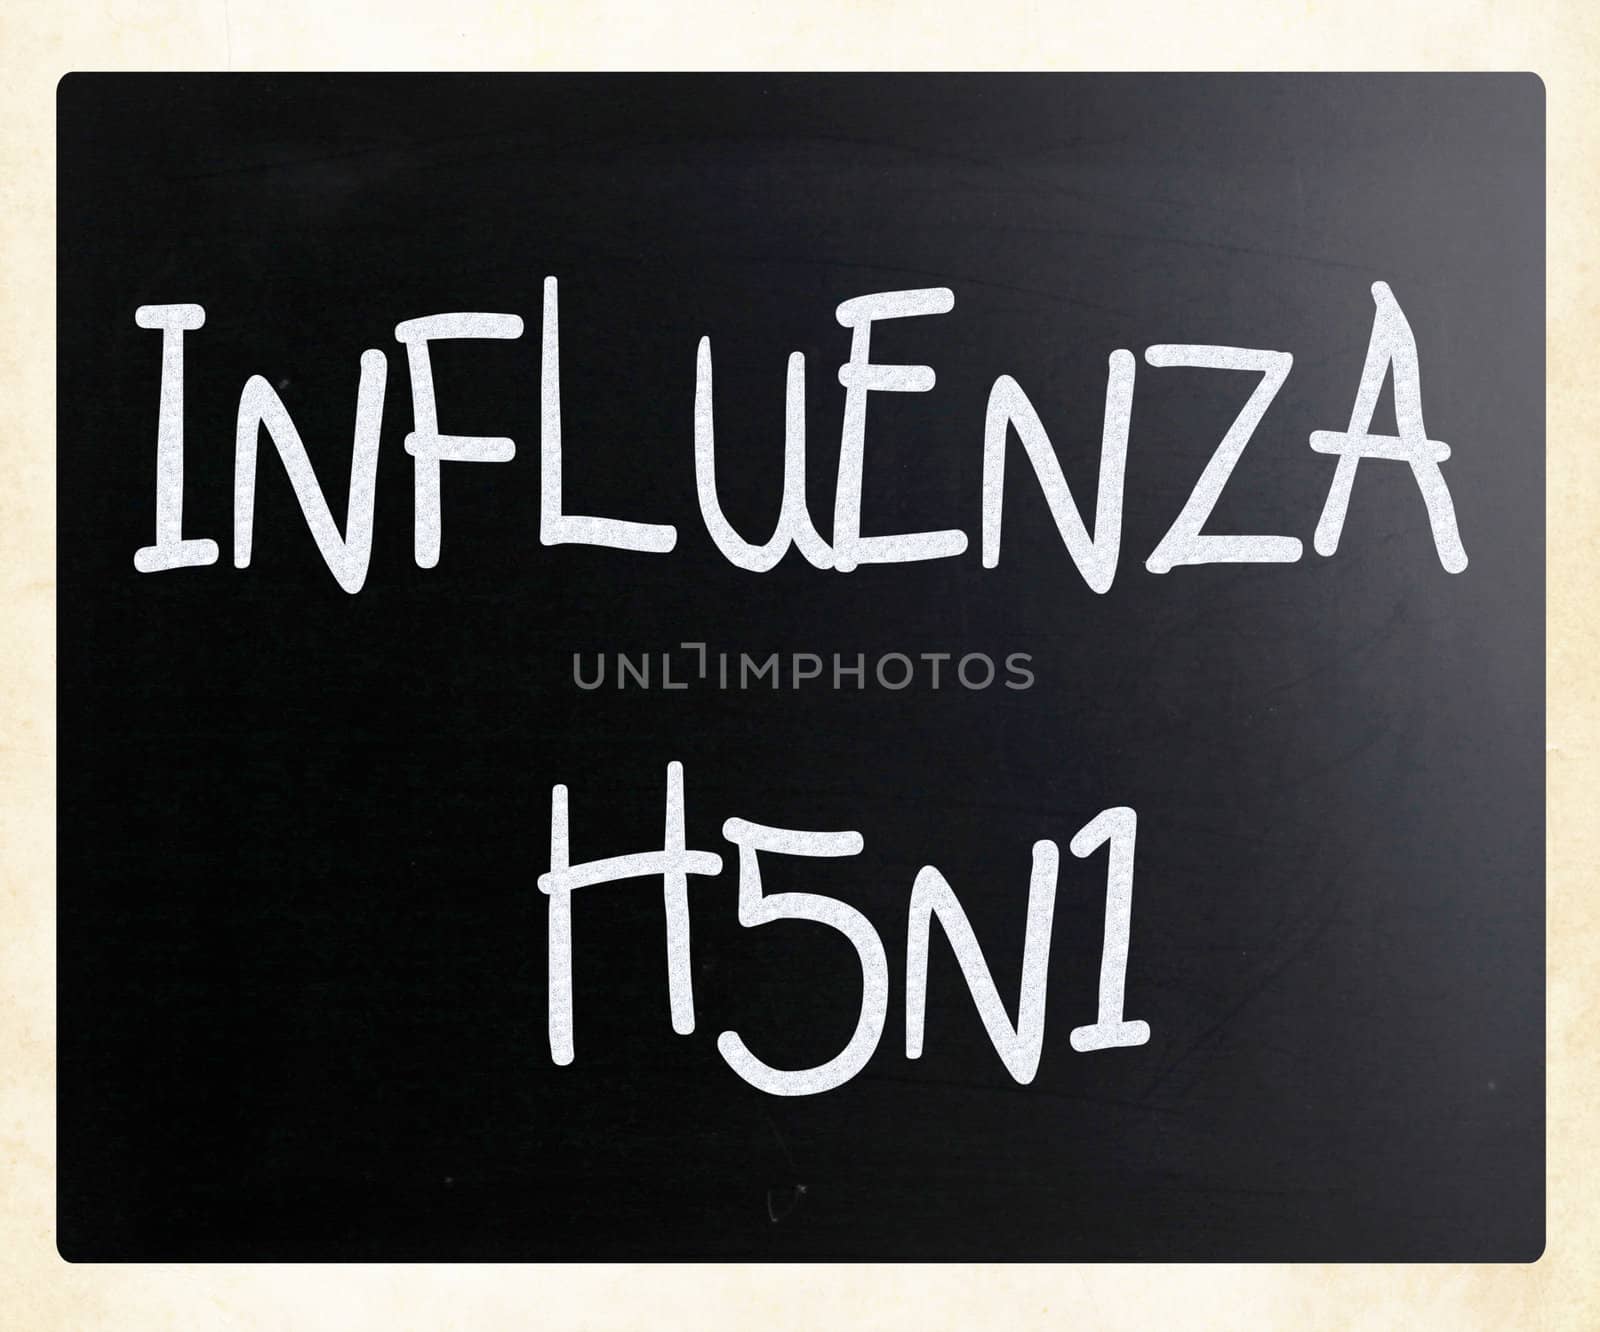 Images of the H5N1 Influenza Virus